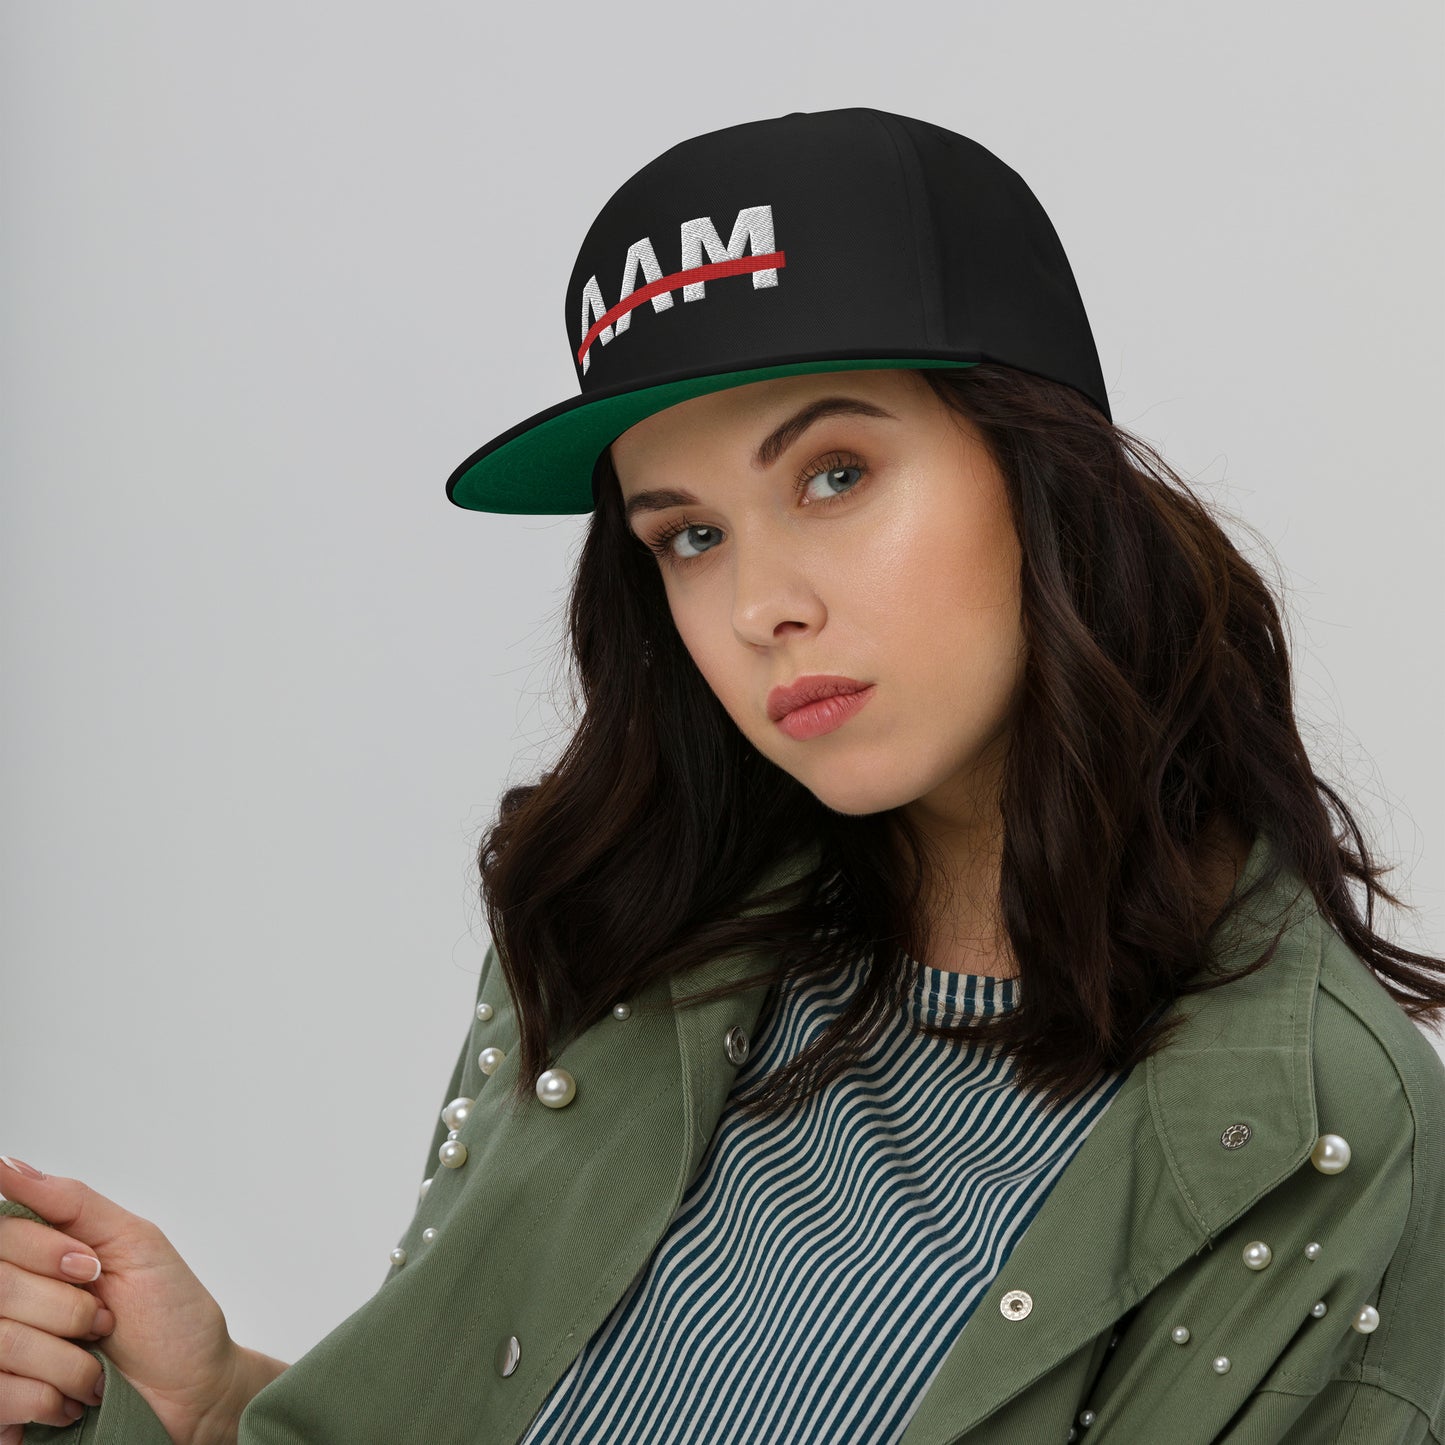 AAM Embroidered Flat Bill Snapback